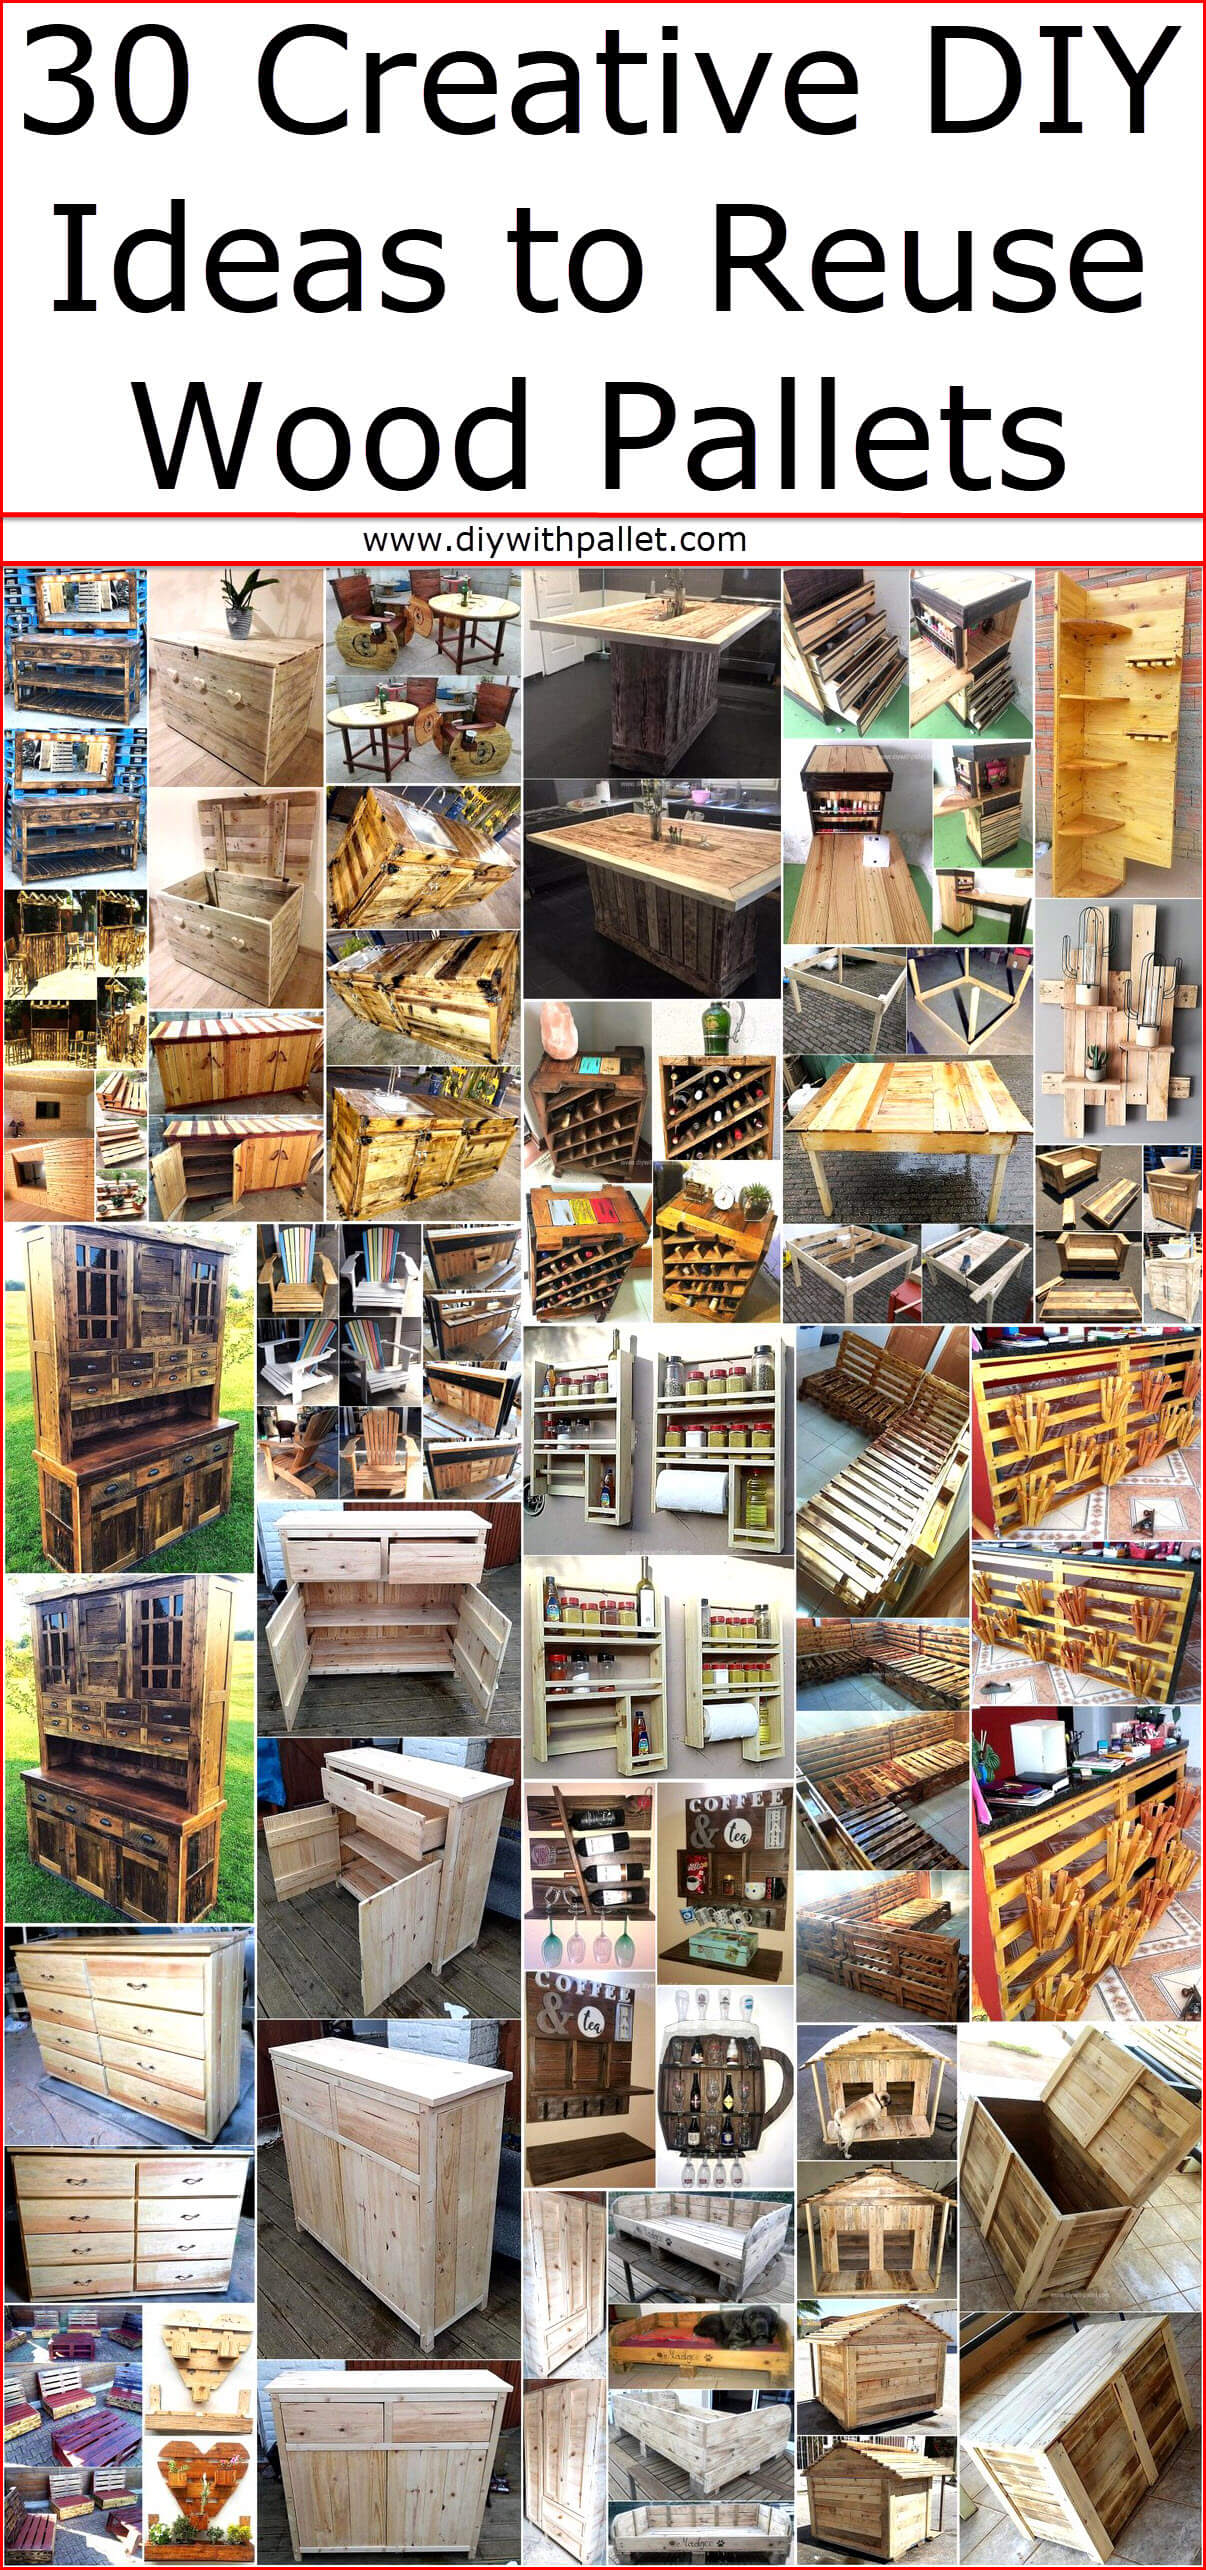 30 Creative DIY Ideas to Reuse Wood Pallets